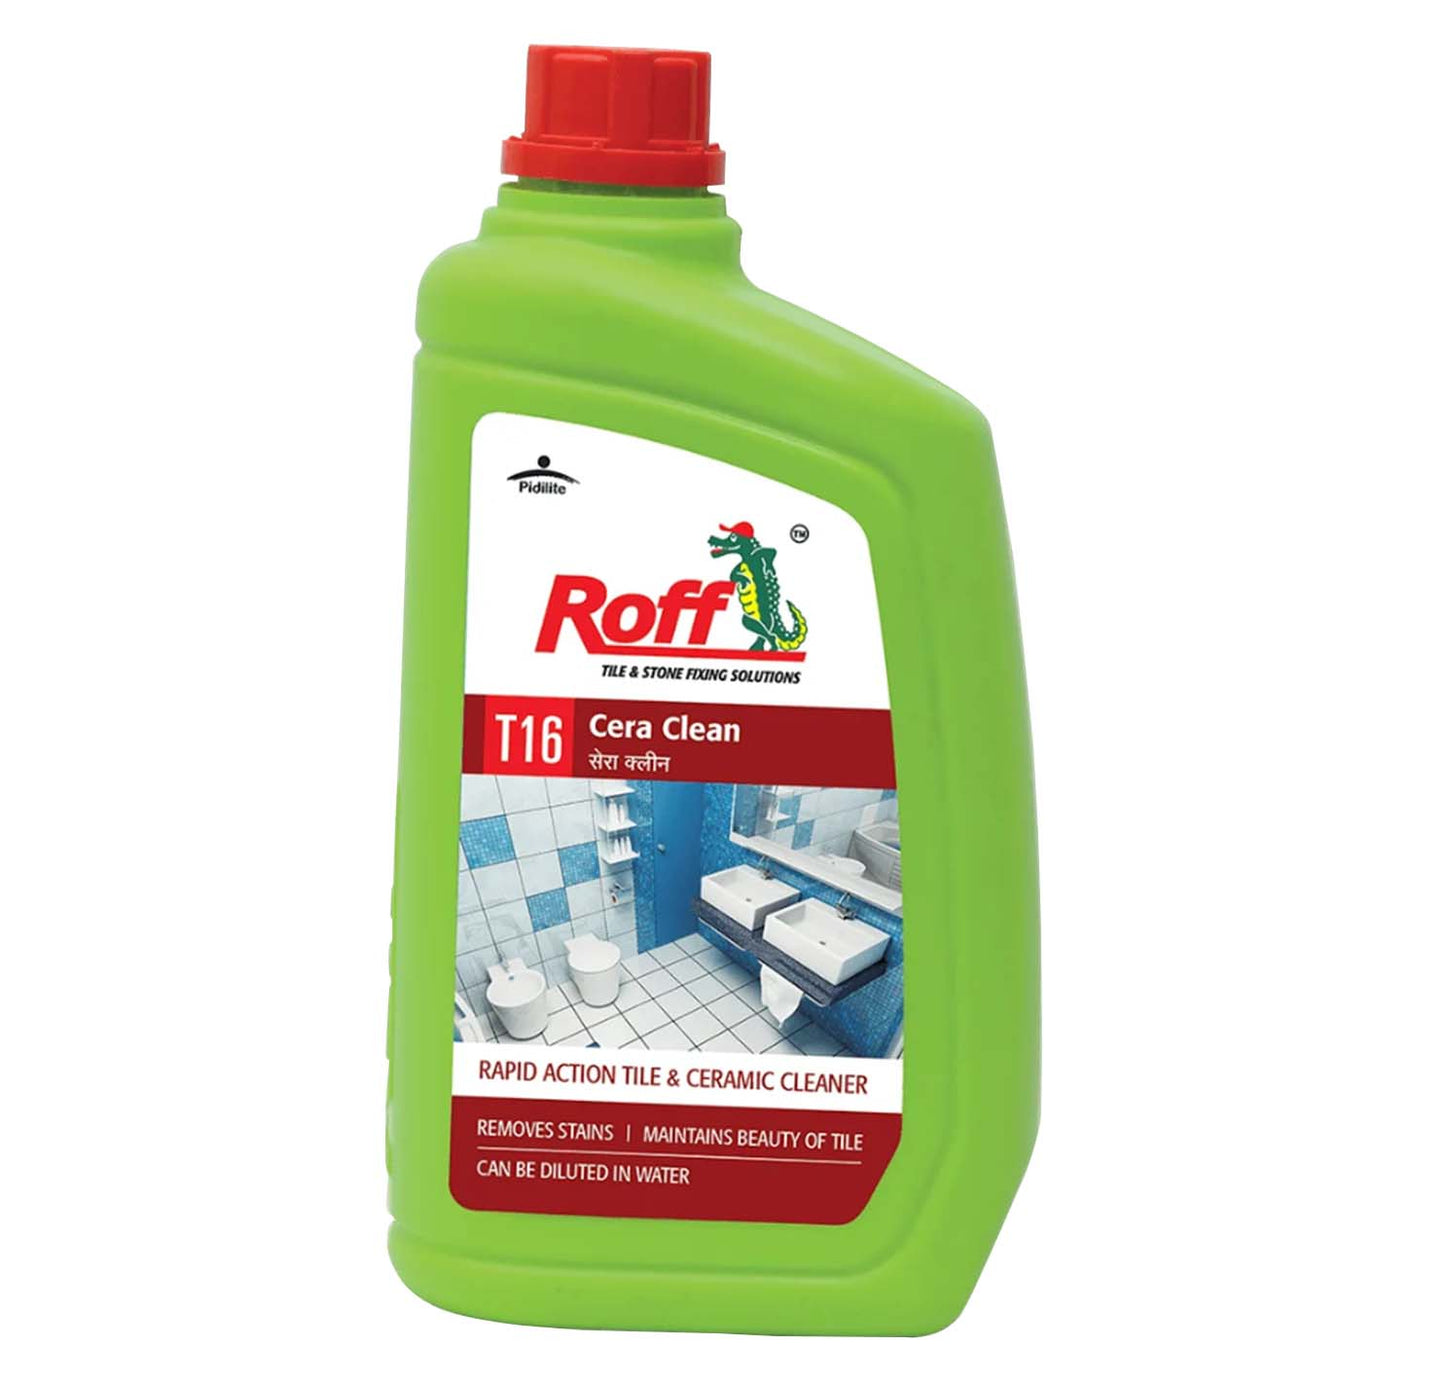 Roff Cera Clean High Performance Tile Cleaner